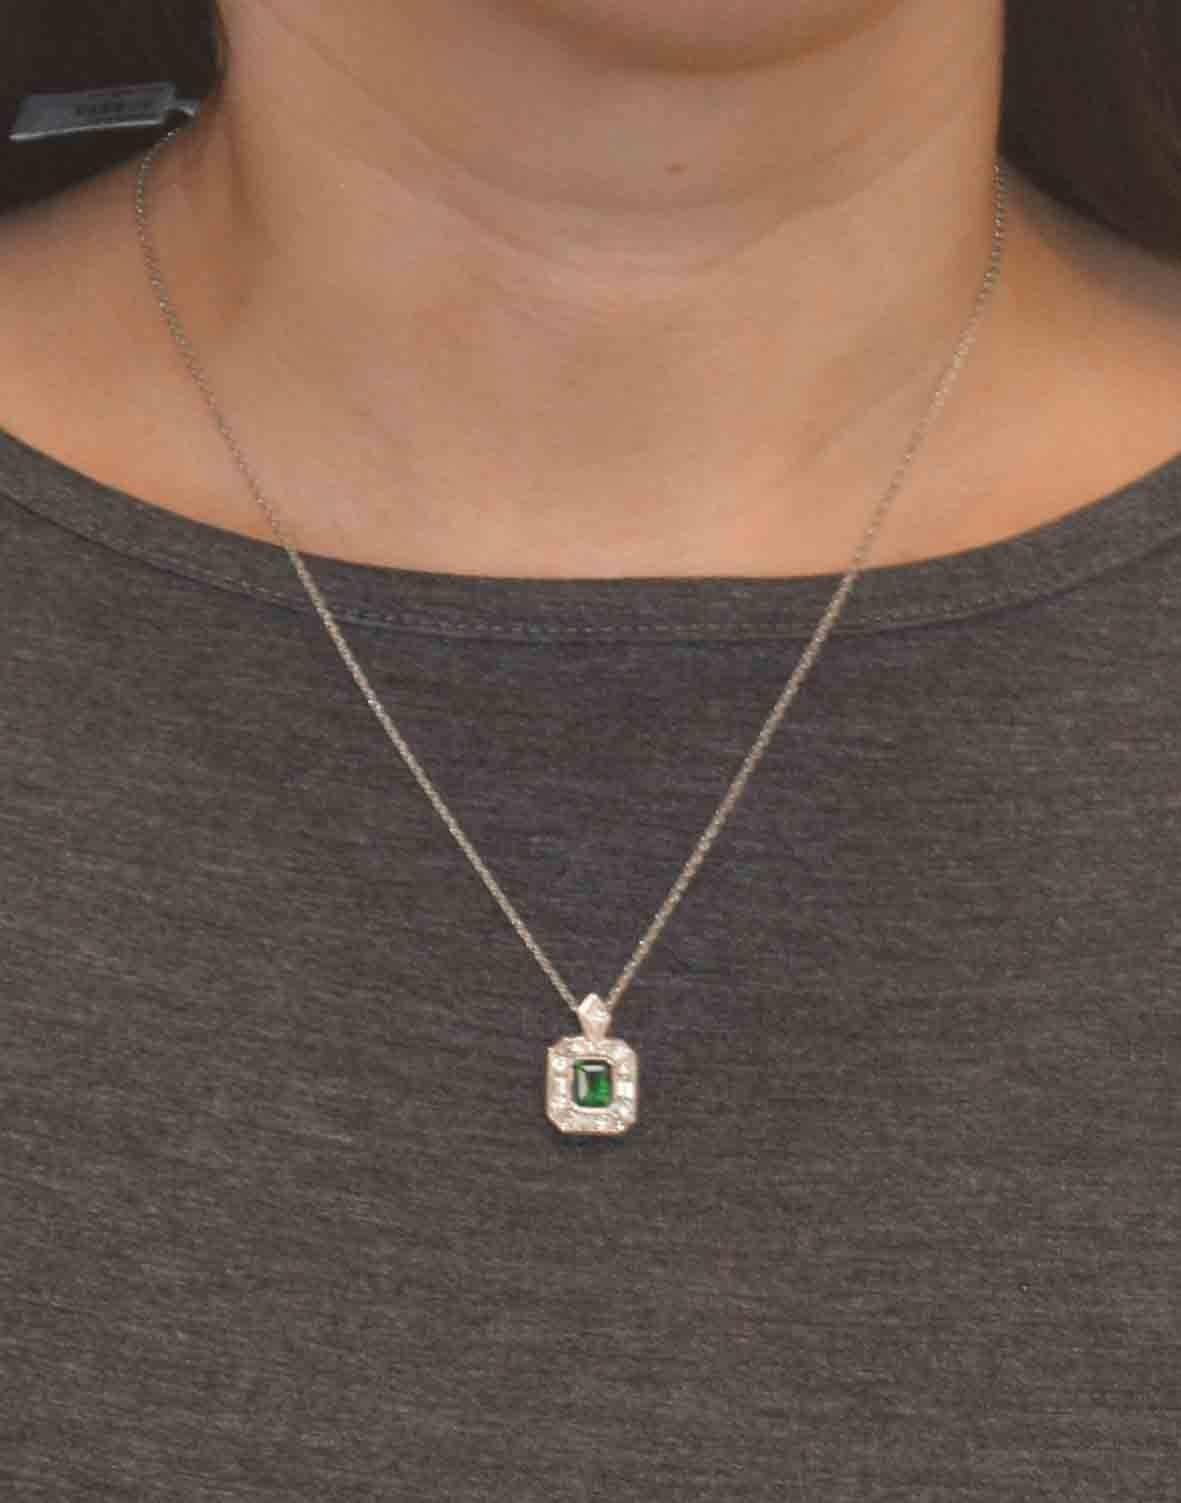 This amazing platinum, diamond, and Emerald pendant features a 1.11 carat  vivid green emerald cut emerald bezel set in the center of the pendant.  This beautiful green emerald is artistically bordered by a channel set halo of baguettes and round